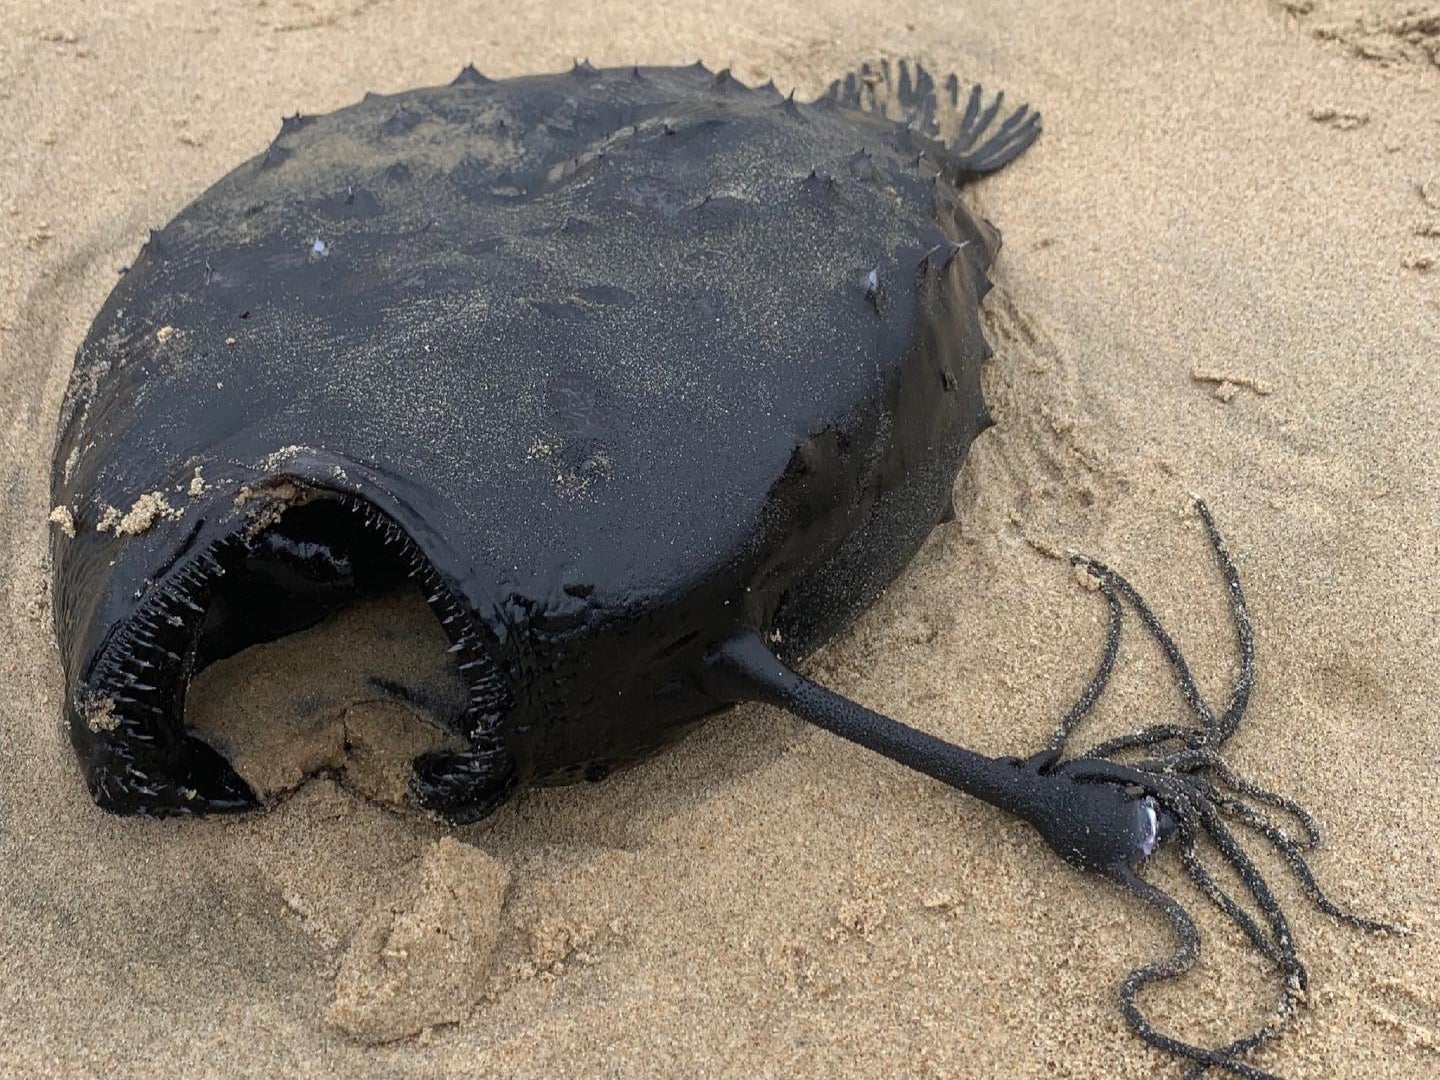 Photographs of the fish shared online show the ‘prehistoric’ looking creature washed ashore